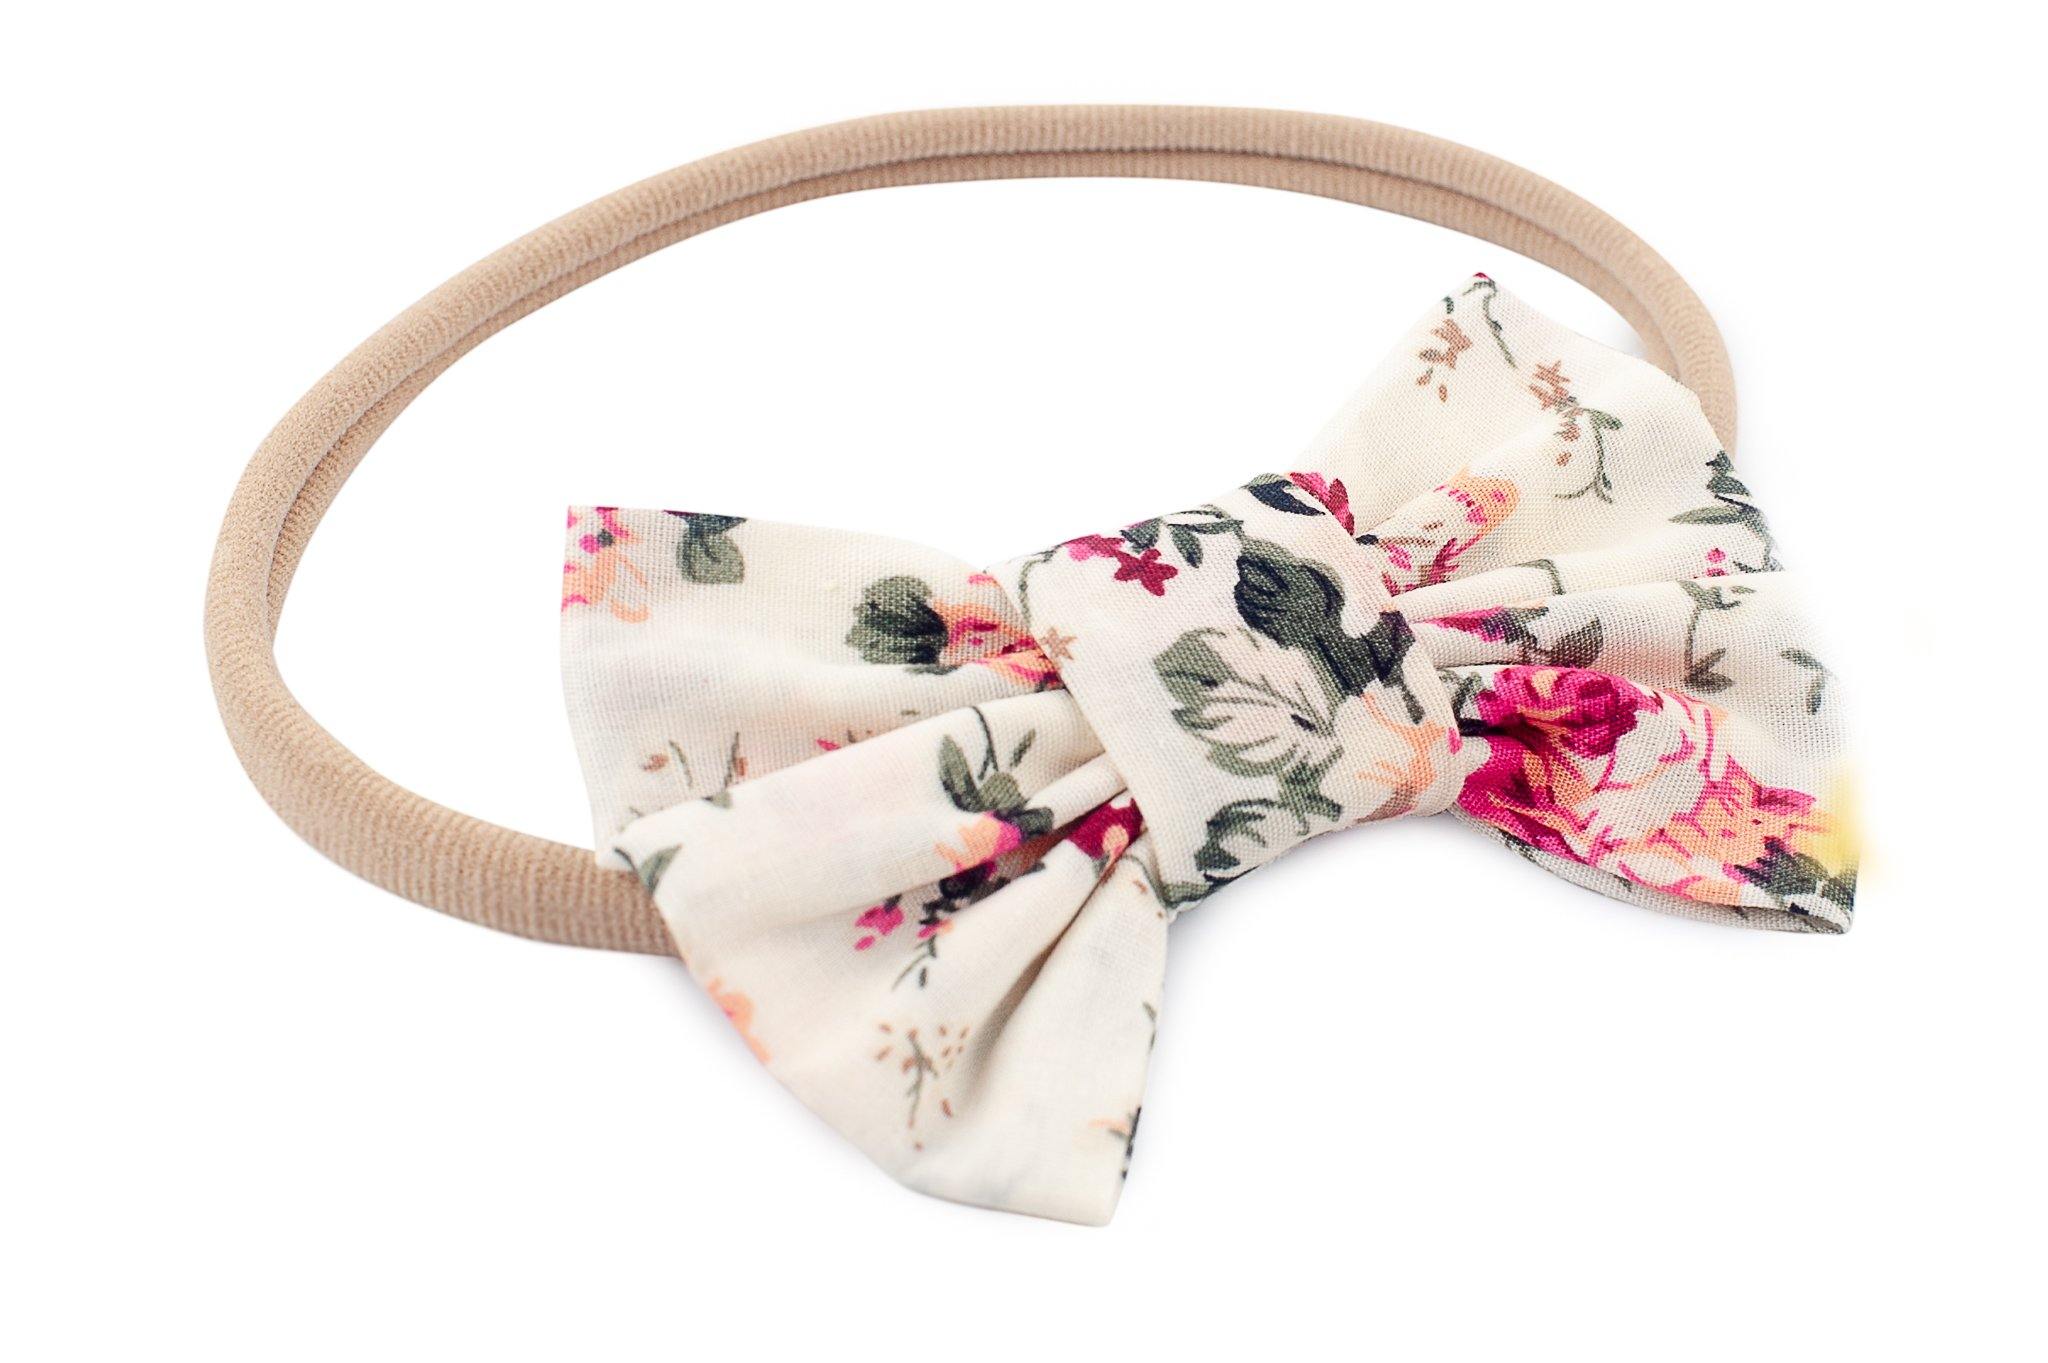 A nylon headband for newborns featuring a floral pattern from By Bella Boutique.